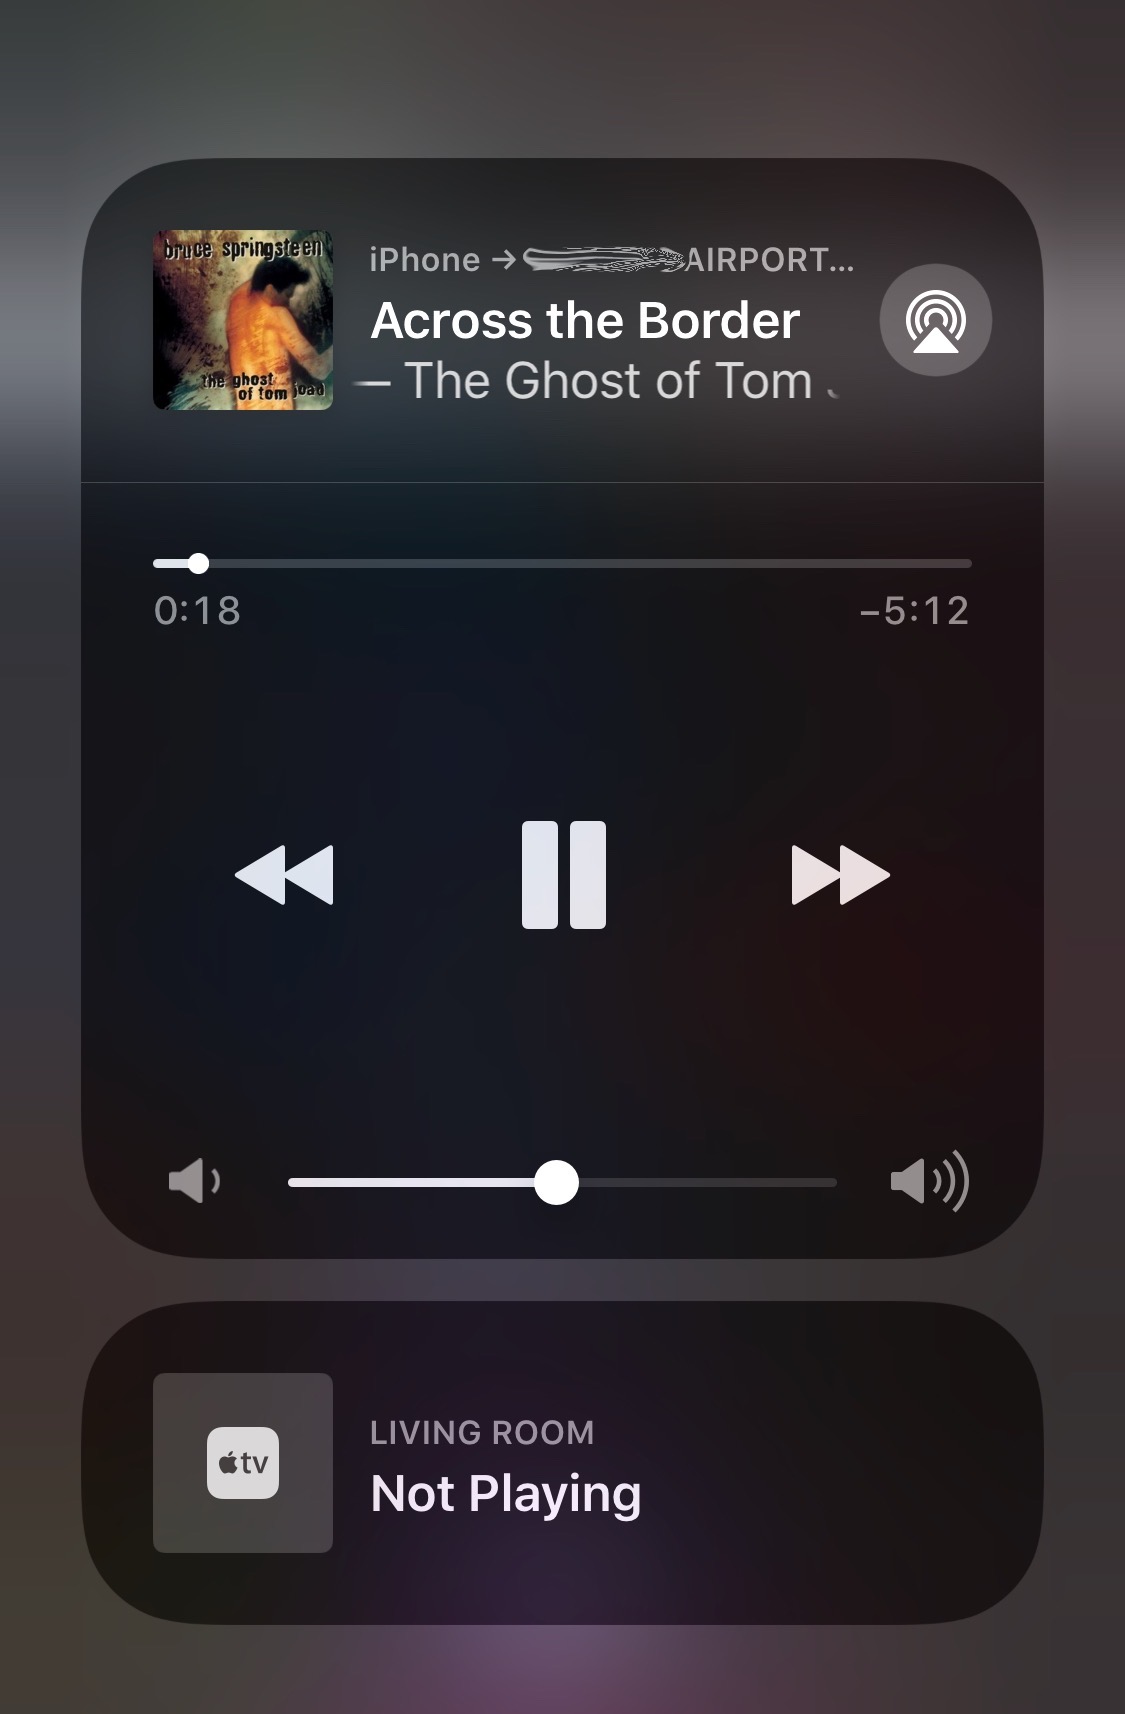 multiple airplay